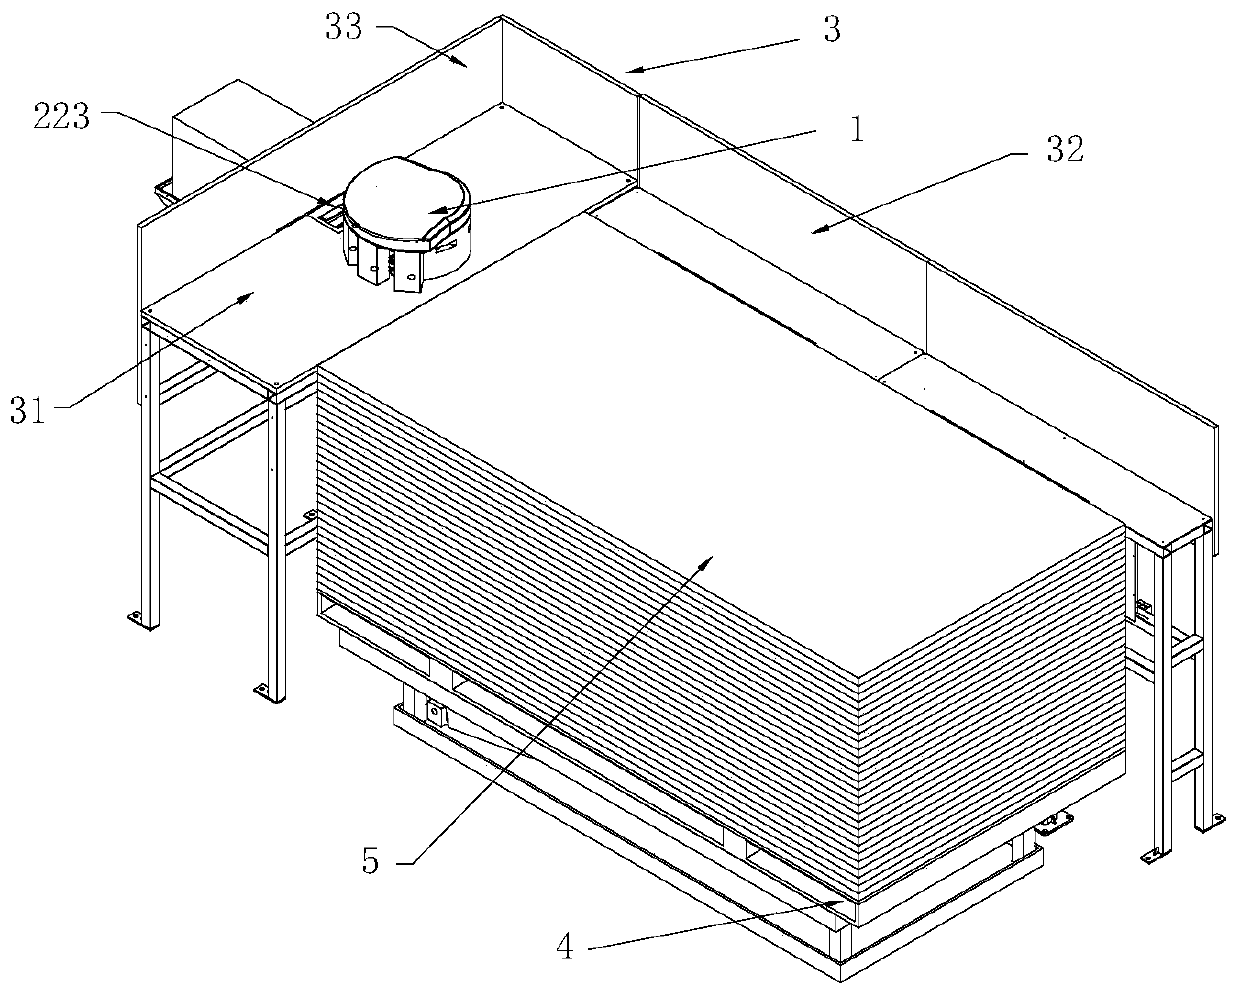 Method for pasting label of customized furniture plate